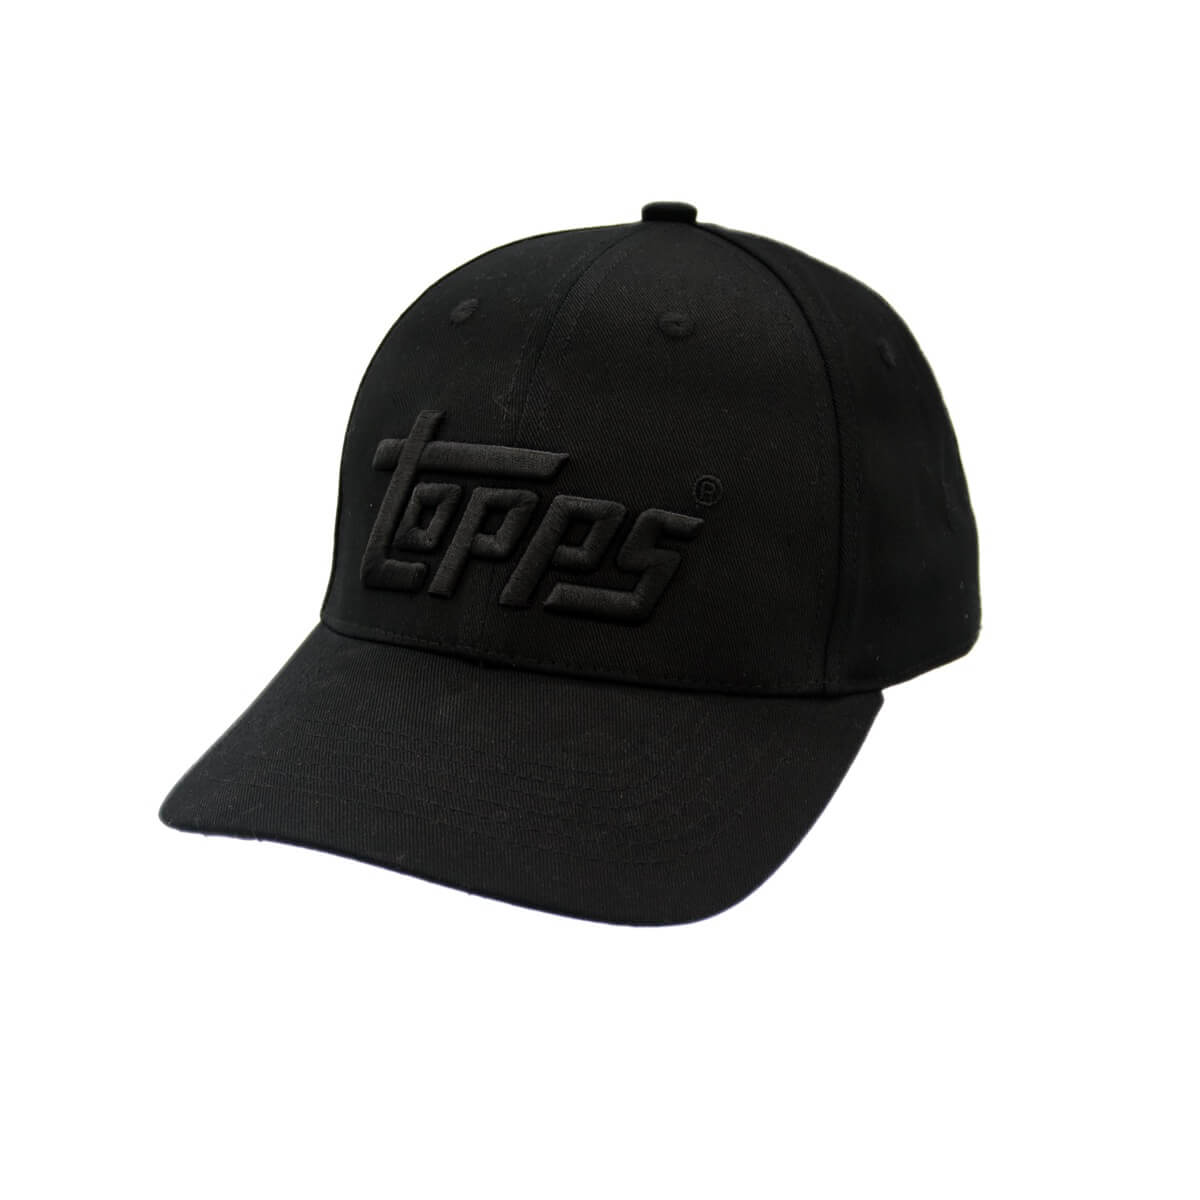 A black baseball cap with 3D embroidery.